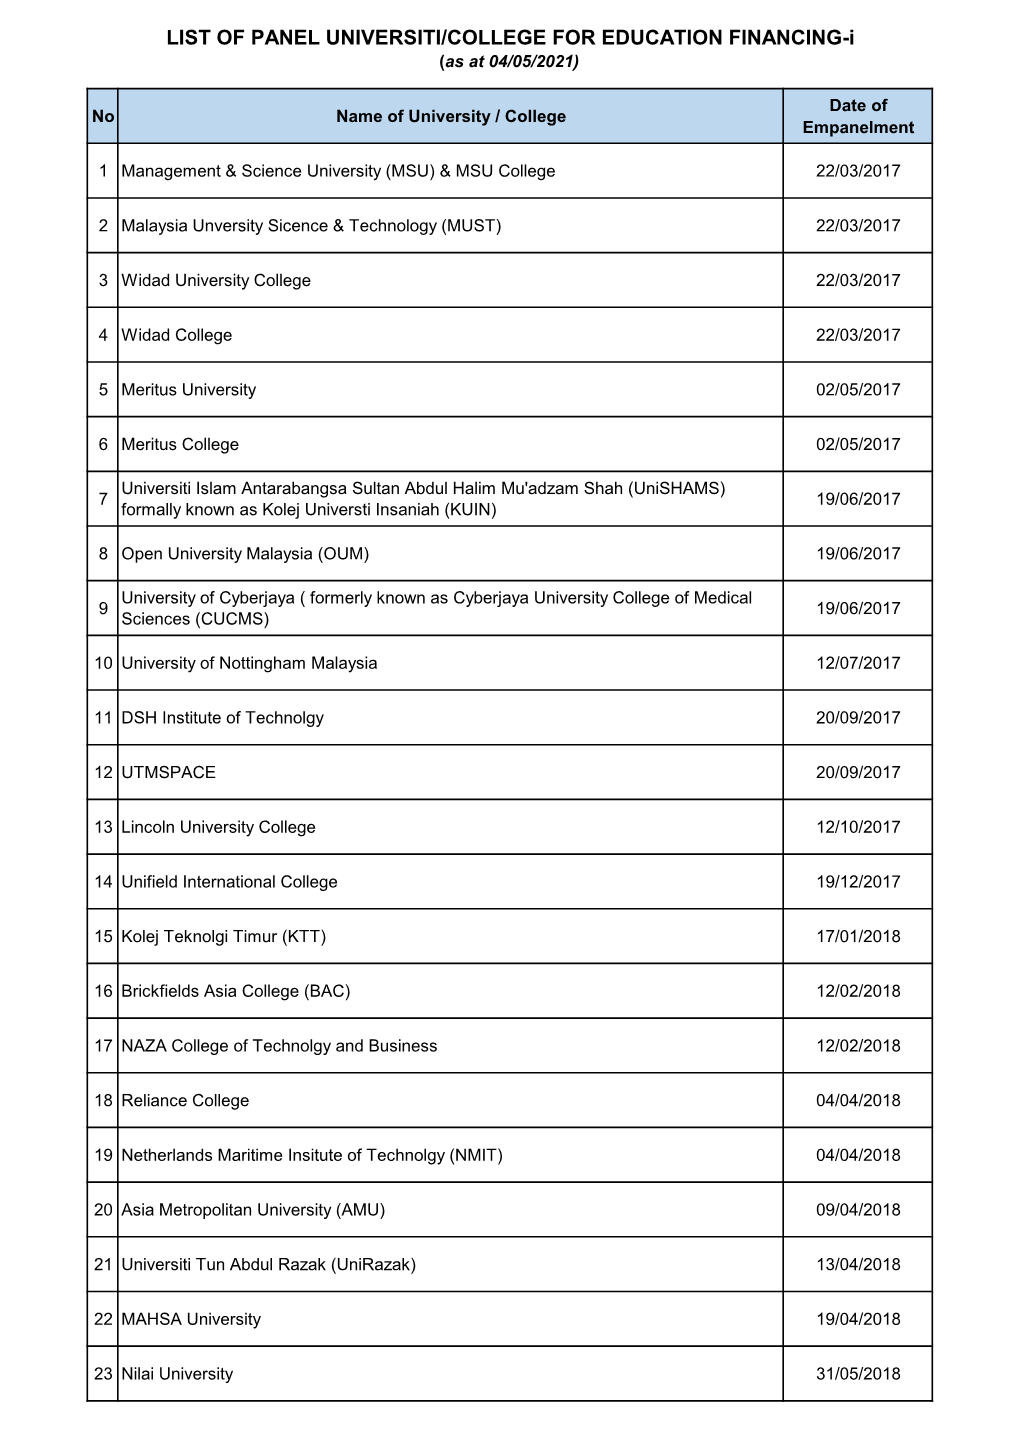 LIST of PANEL UNIVERSITI/COLLEGE for EDUCATION FINANCING-I (As at 04/05/2021)